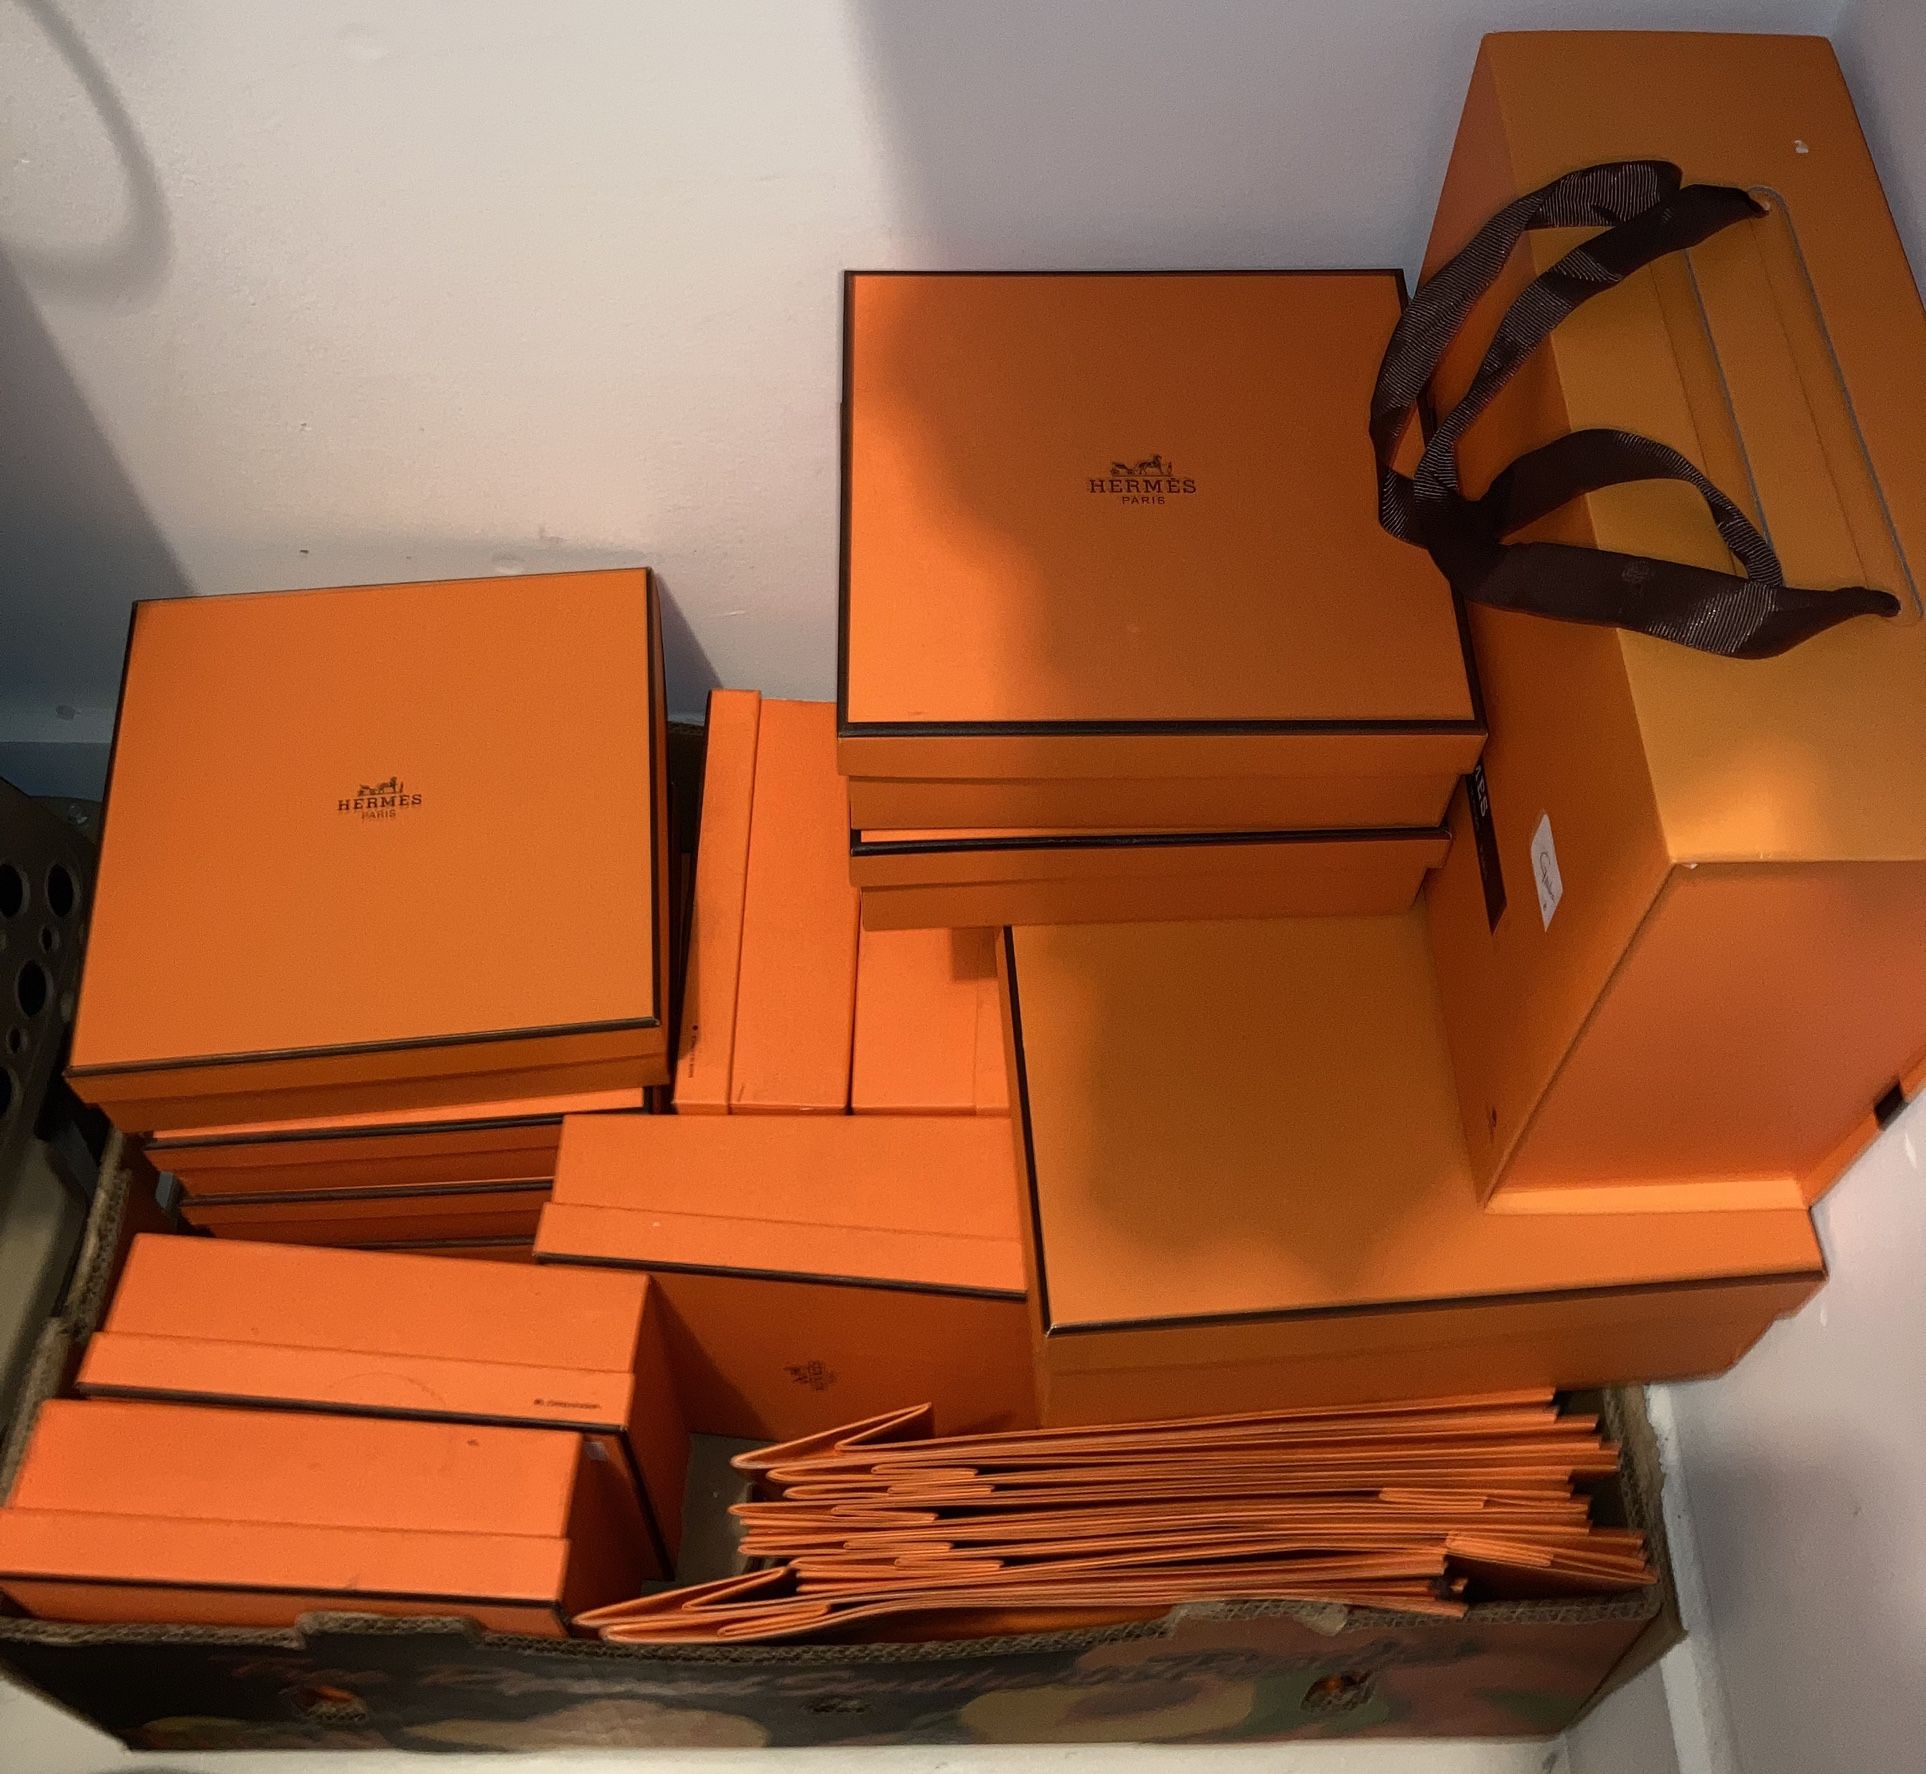 Hermes Boxes and Bags